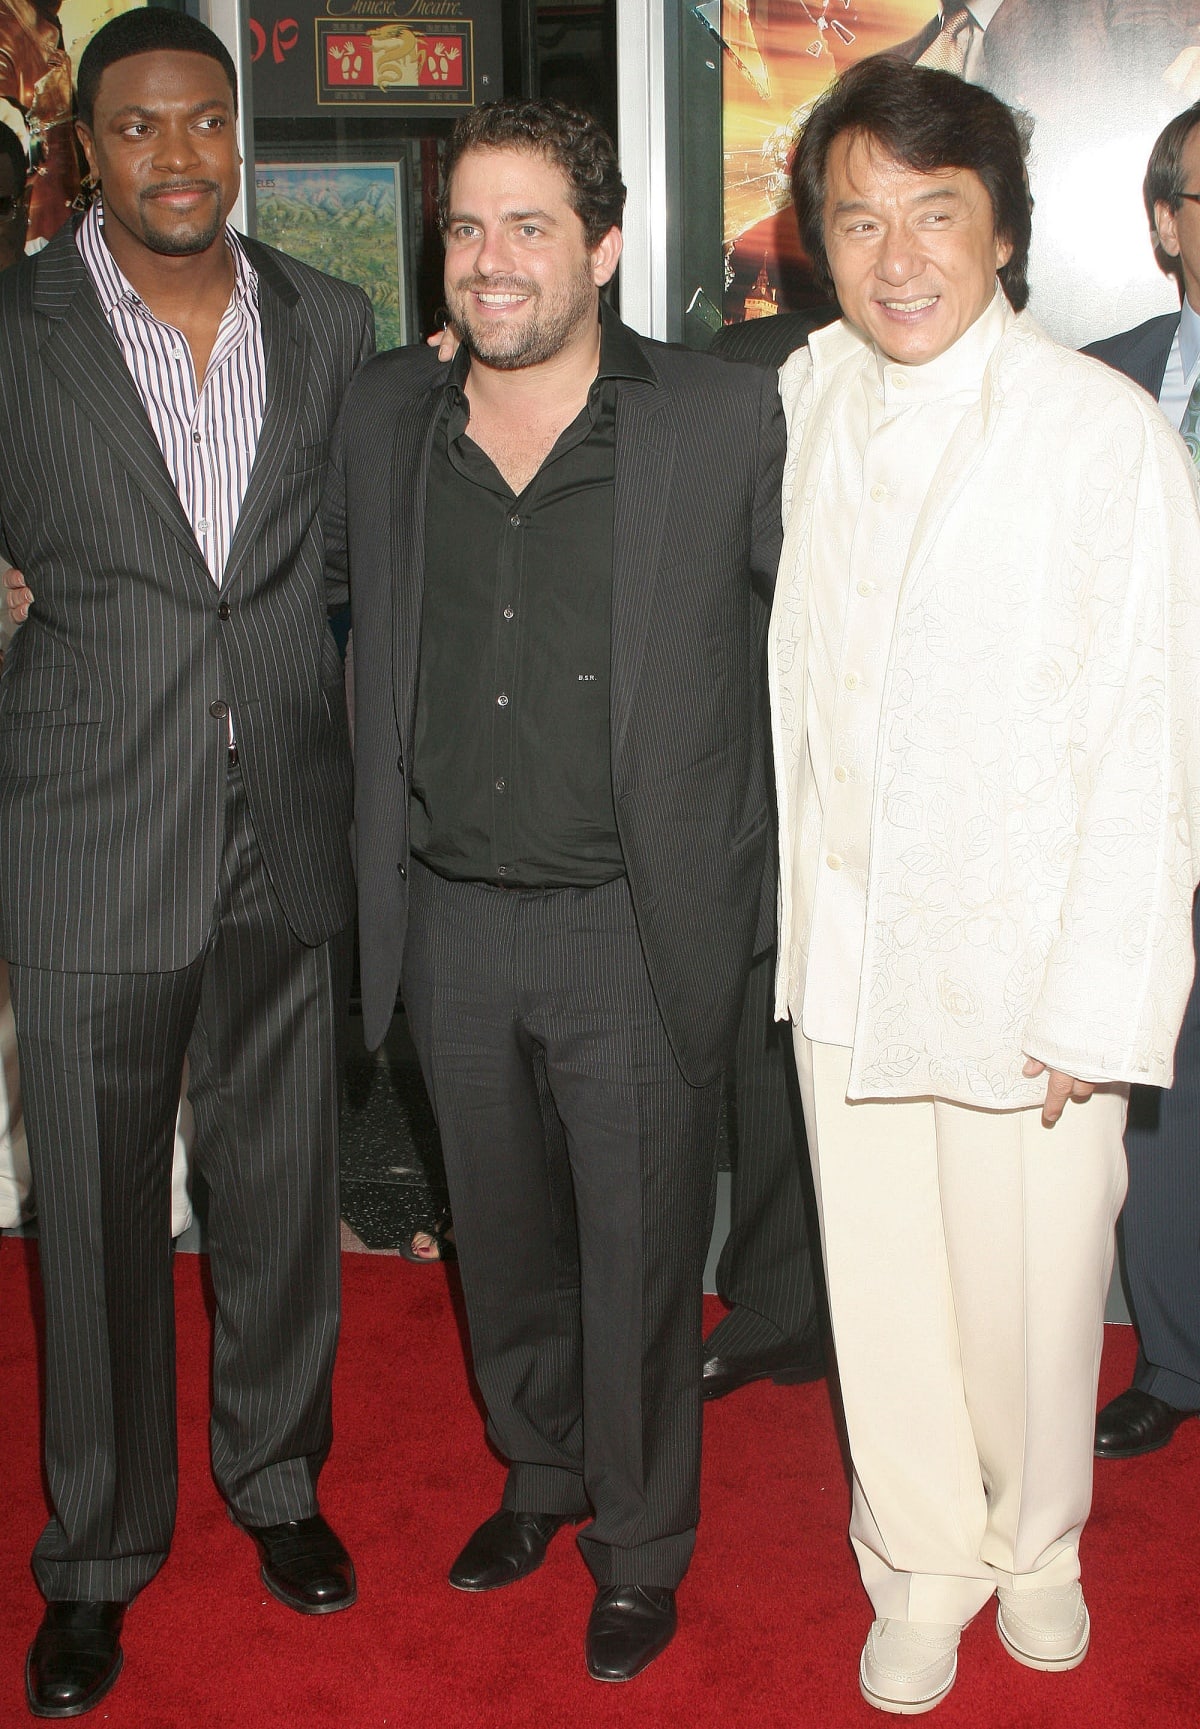 Chris Tucker and Jackie Chan with director Brett Ratner at the premiere of Rush Hour 3